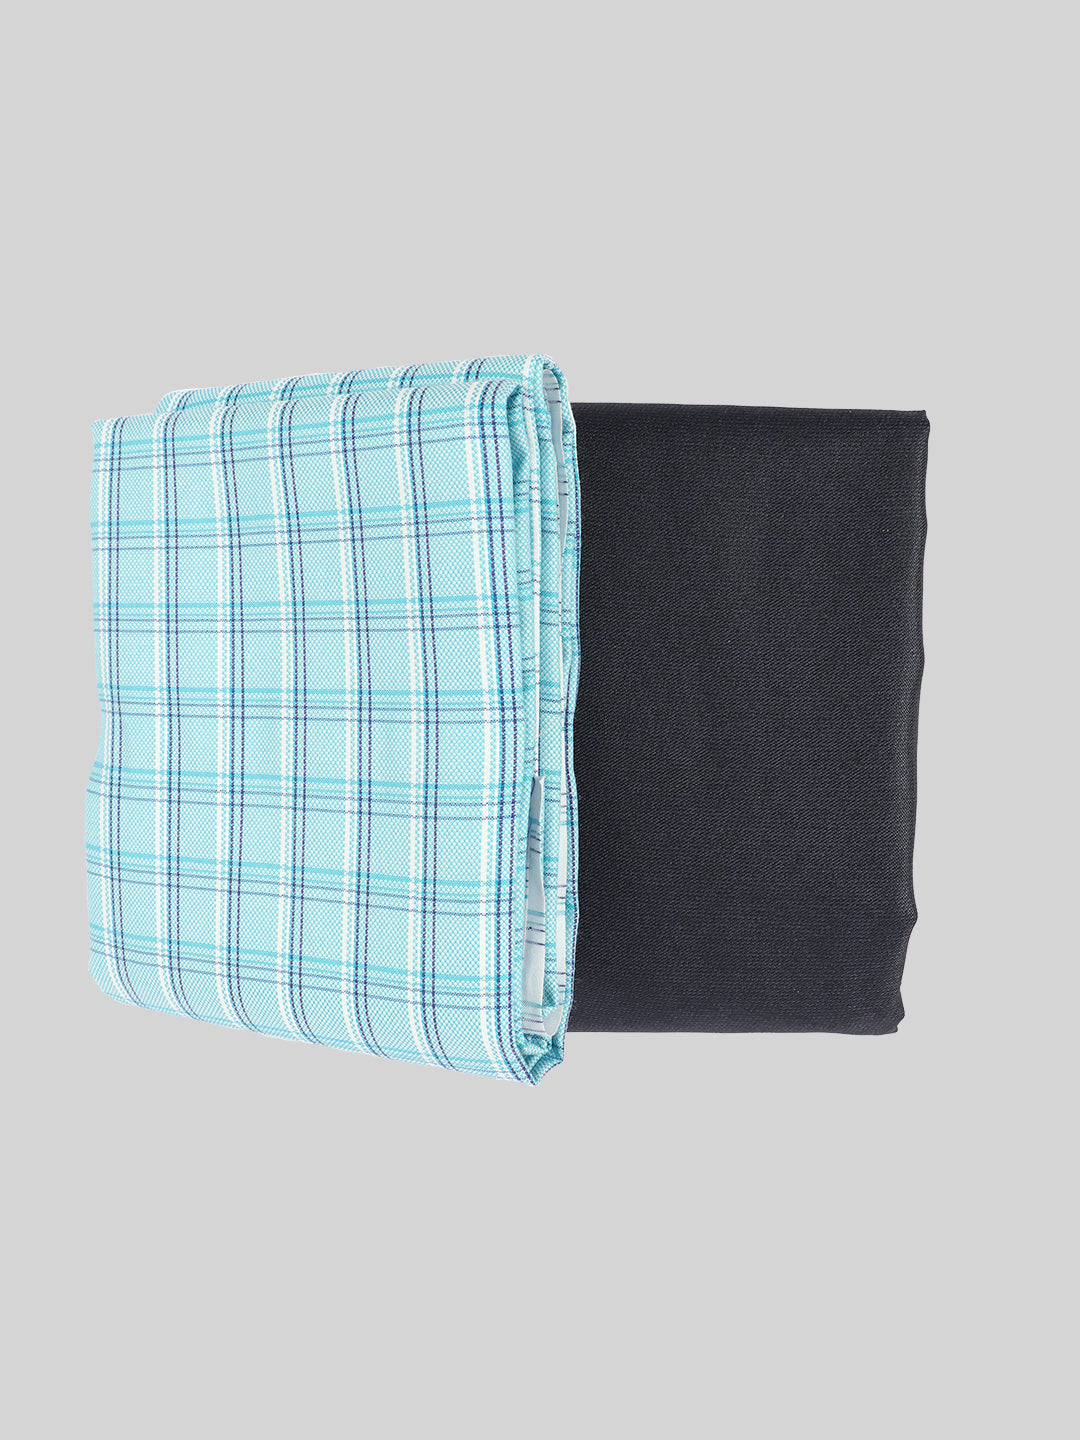 Rich Cotton Checked  Light Blue with Navy Colour Shirting & Suiting Gift Box Combo ME145